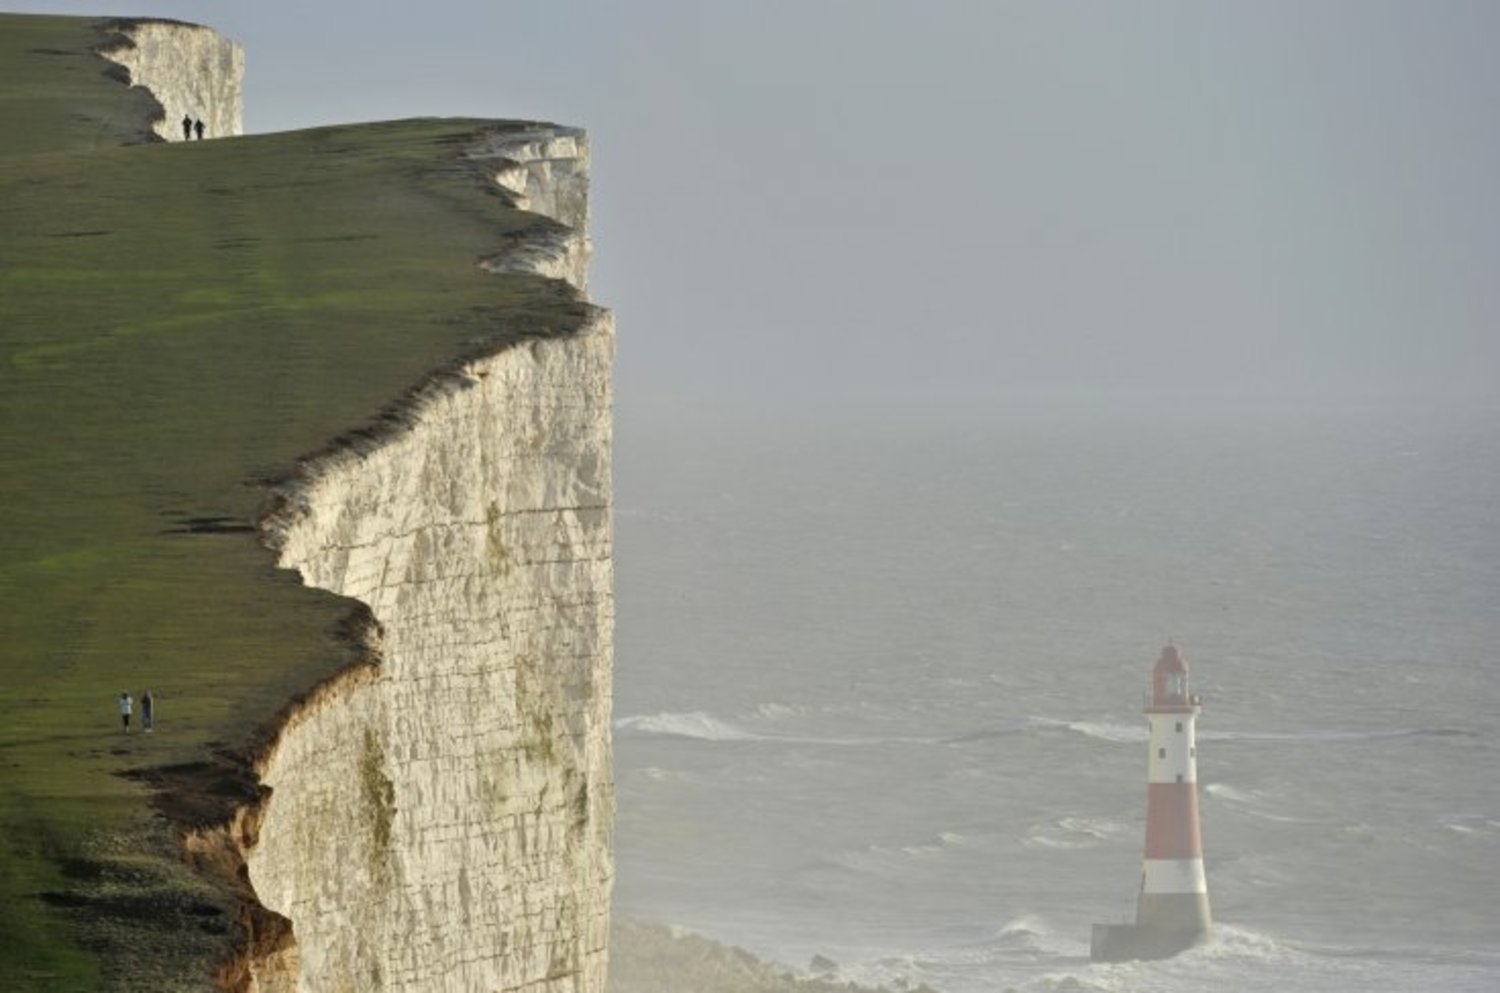 The areas between Eastbourne and Birling Gap were the scene of a chemical cloud that left people with stinging eyes. (Reuters)